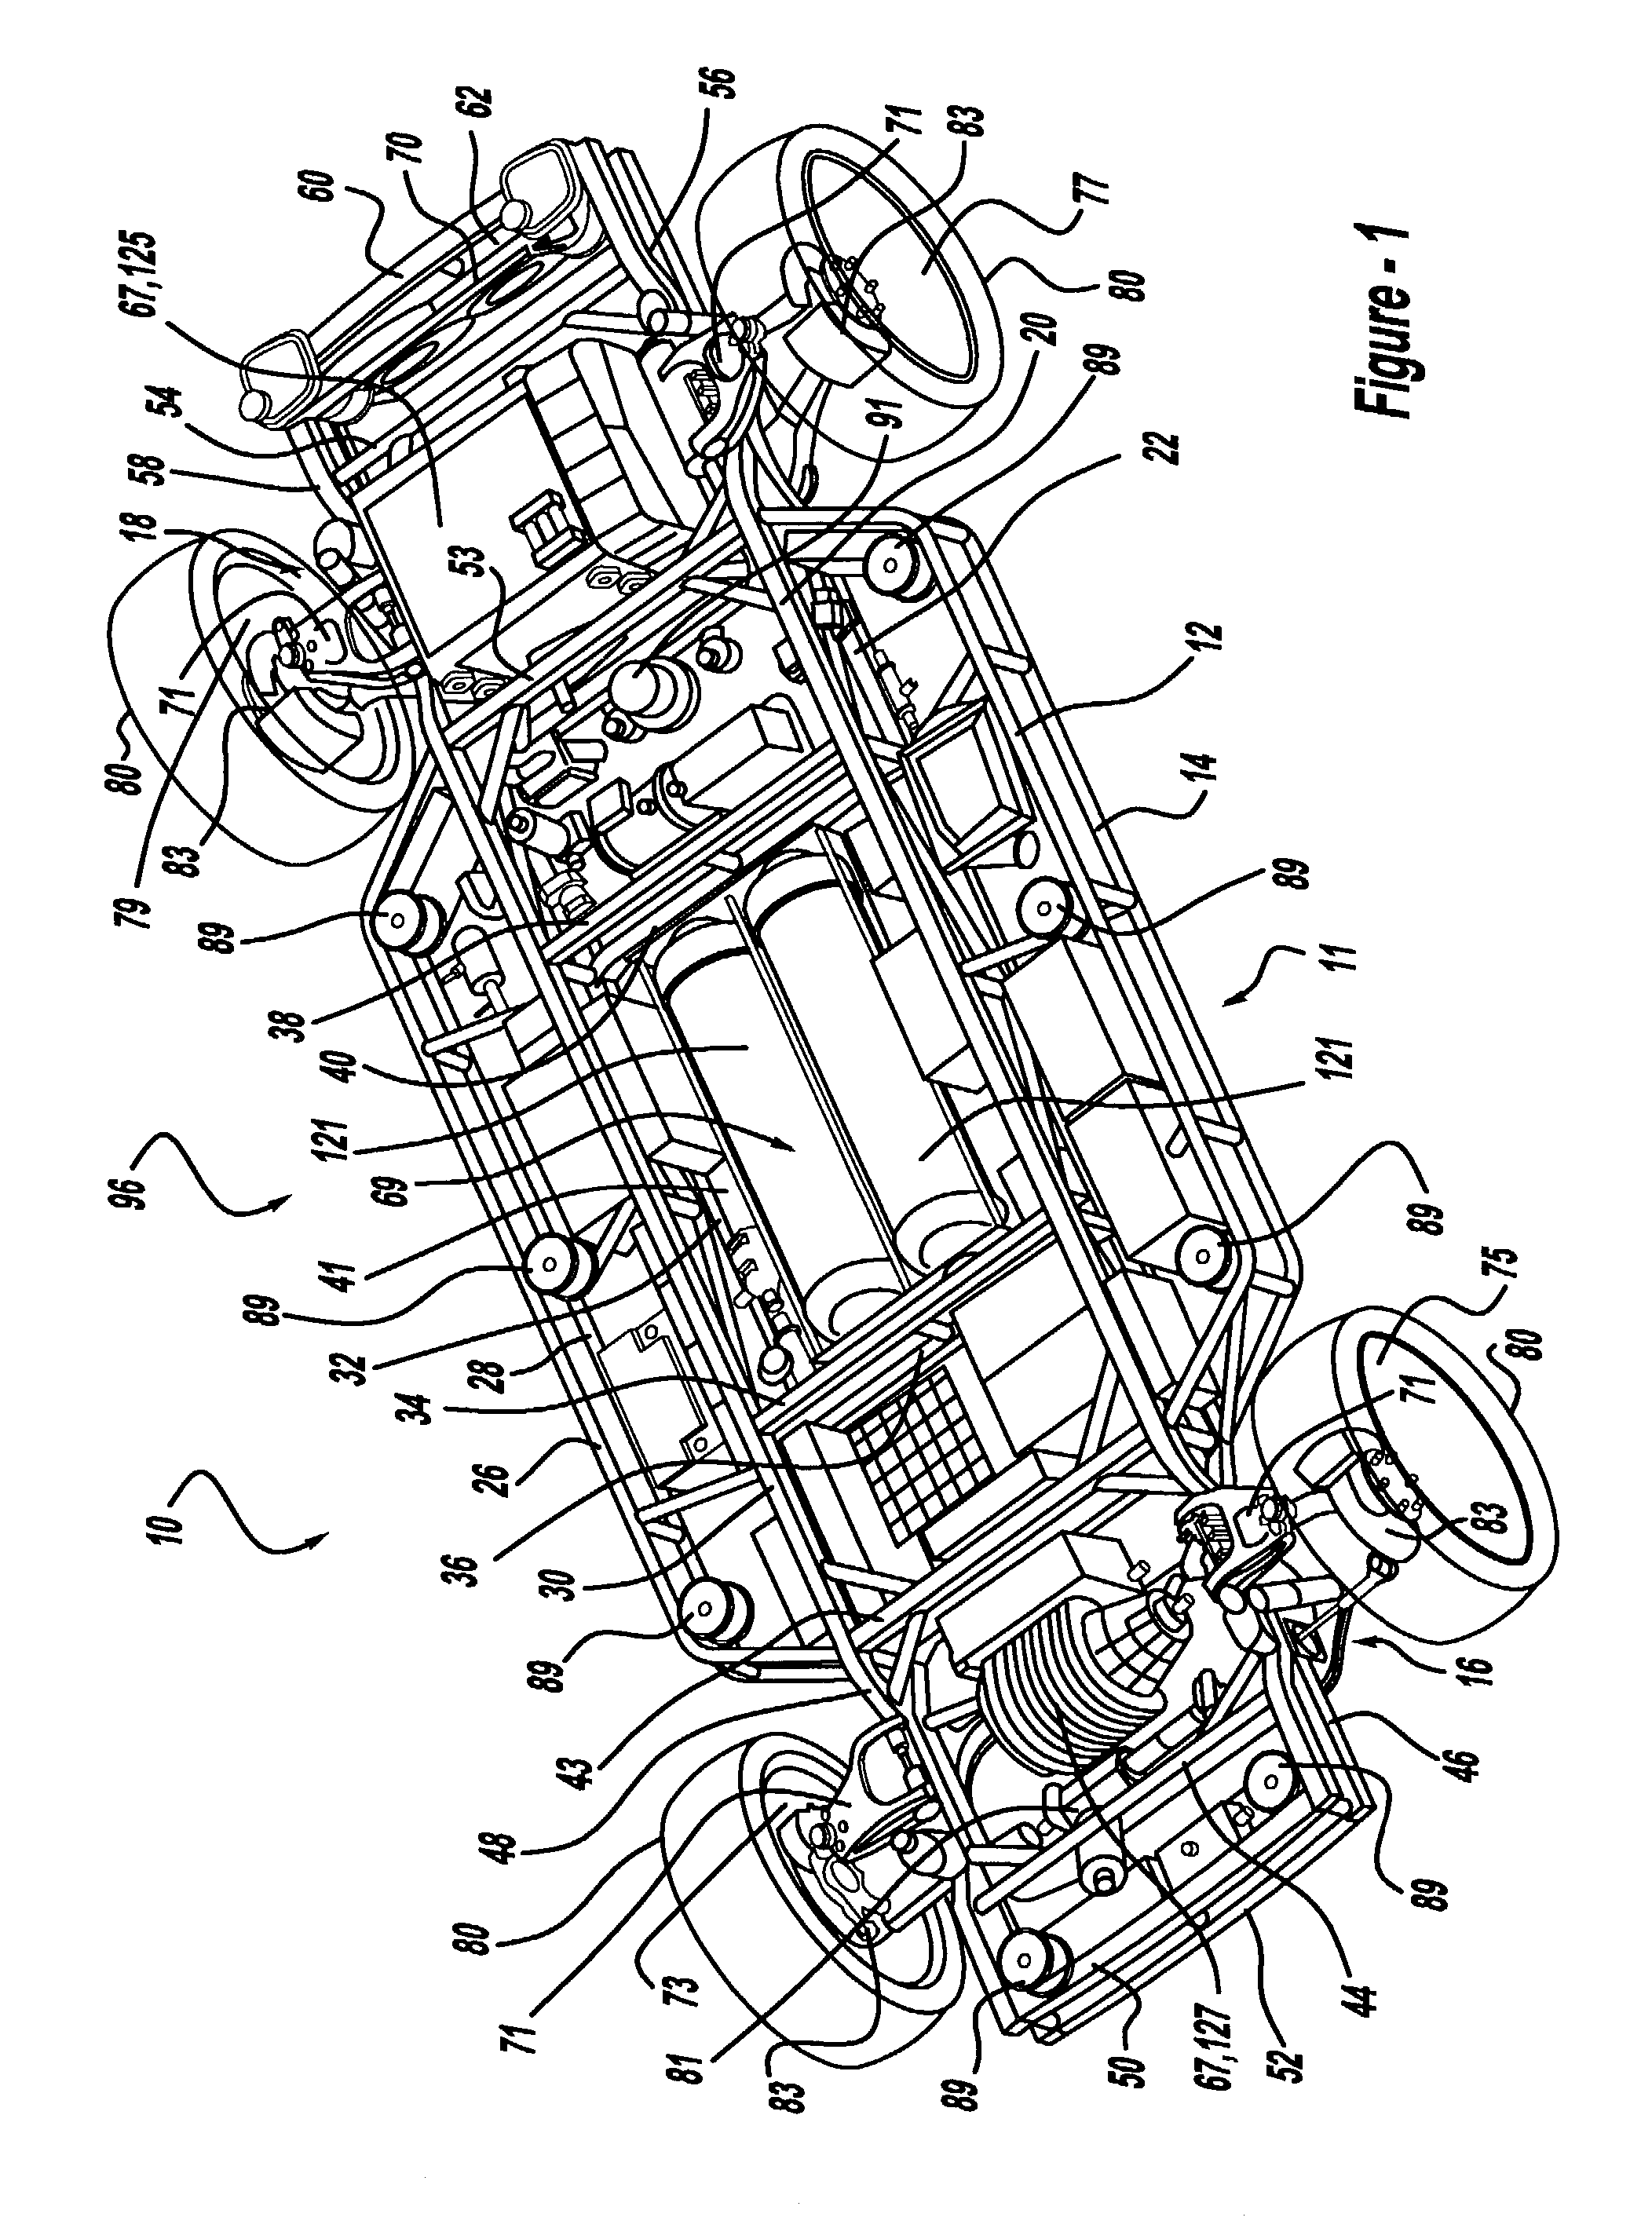 Method of designing and manufacturing vehicles